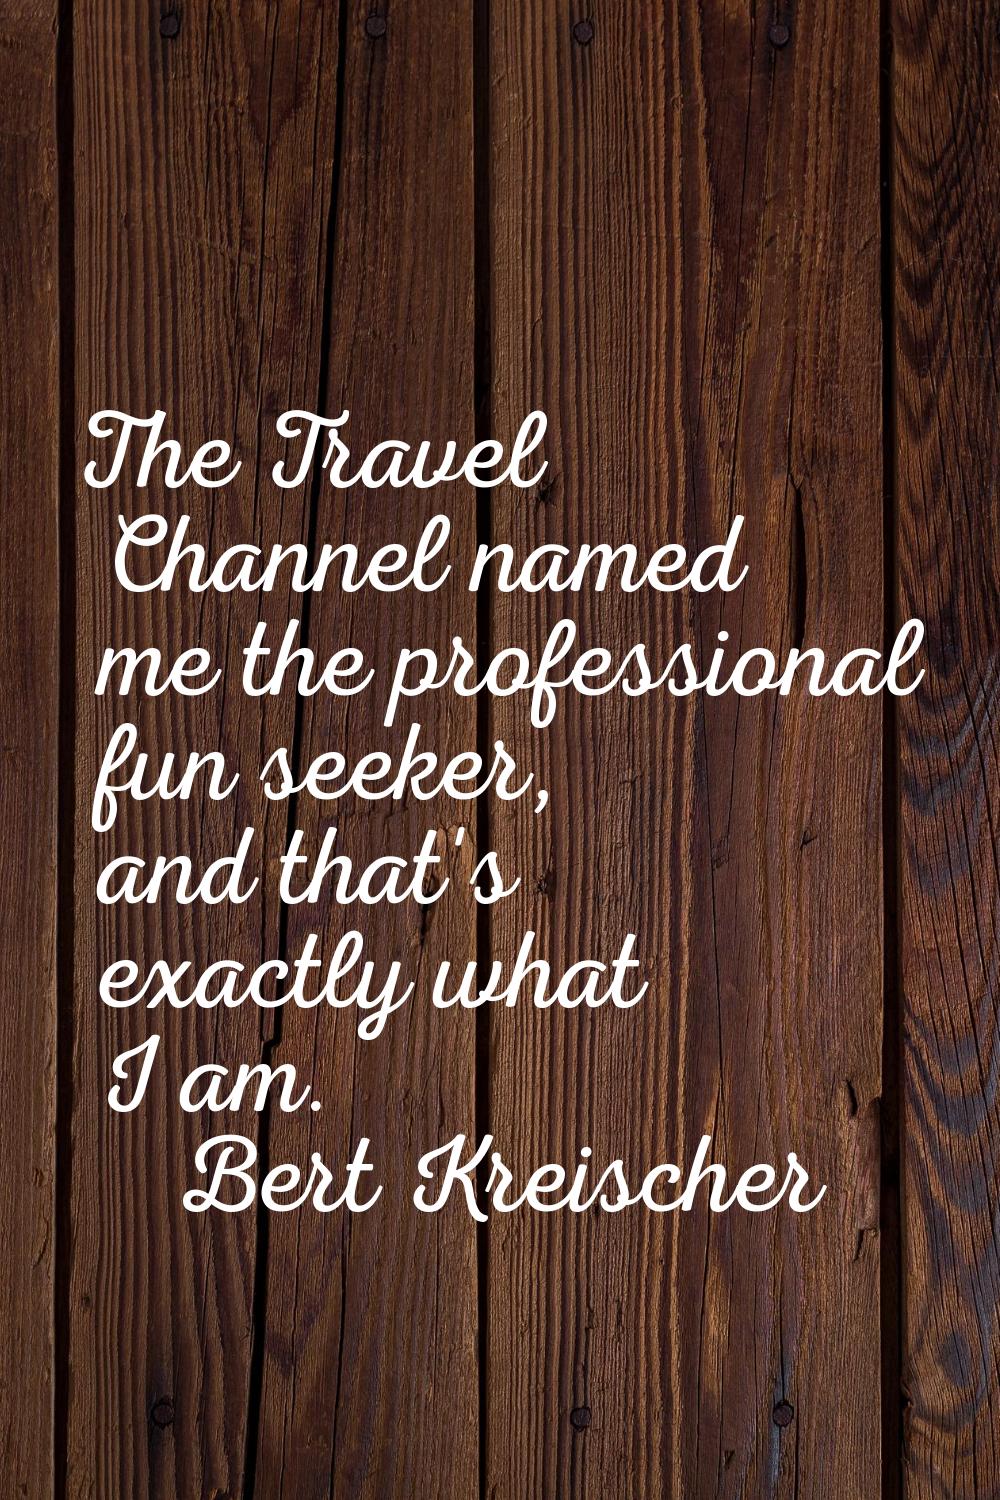 The Travel Channel named me the professional fun seeker, and that's exactly what I am.